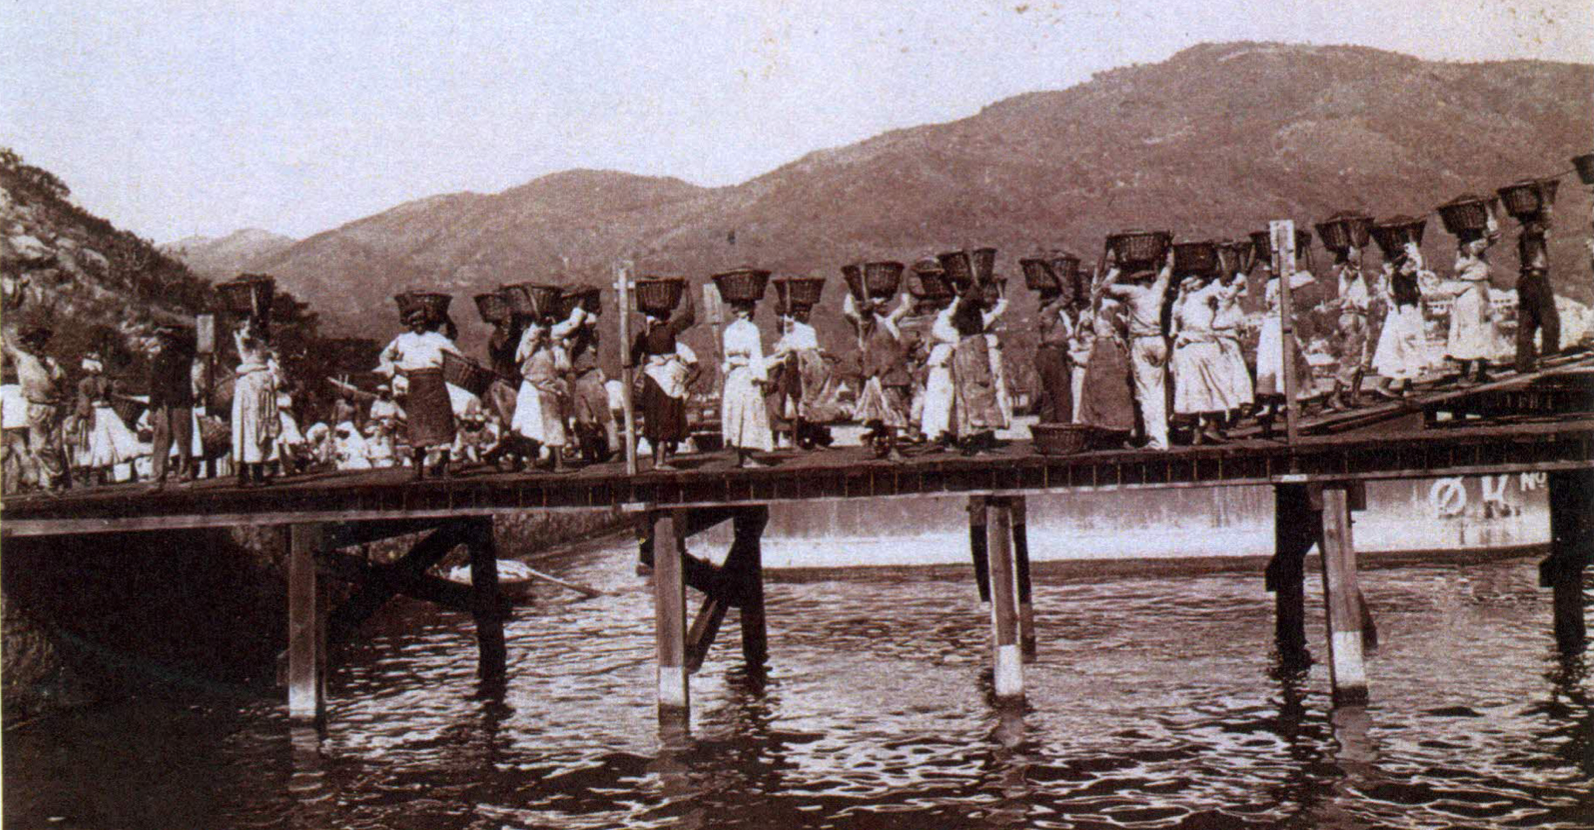 Coal-carriers walk in a row on the East Asiatic Company’s quay. The firm was established on St. Thomas after the Danish Parliament rejected a treaty on the sale of the islands in 1902. The EAC’s coal harbour was on Hassel Island, and the company quickly became the biggest coal supplier in the Danish West Indies. (Photo courtesy Olasee Davis)